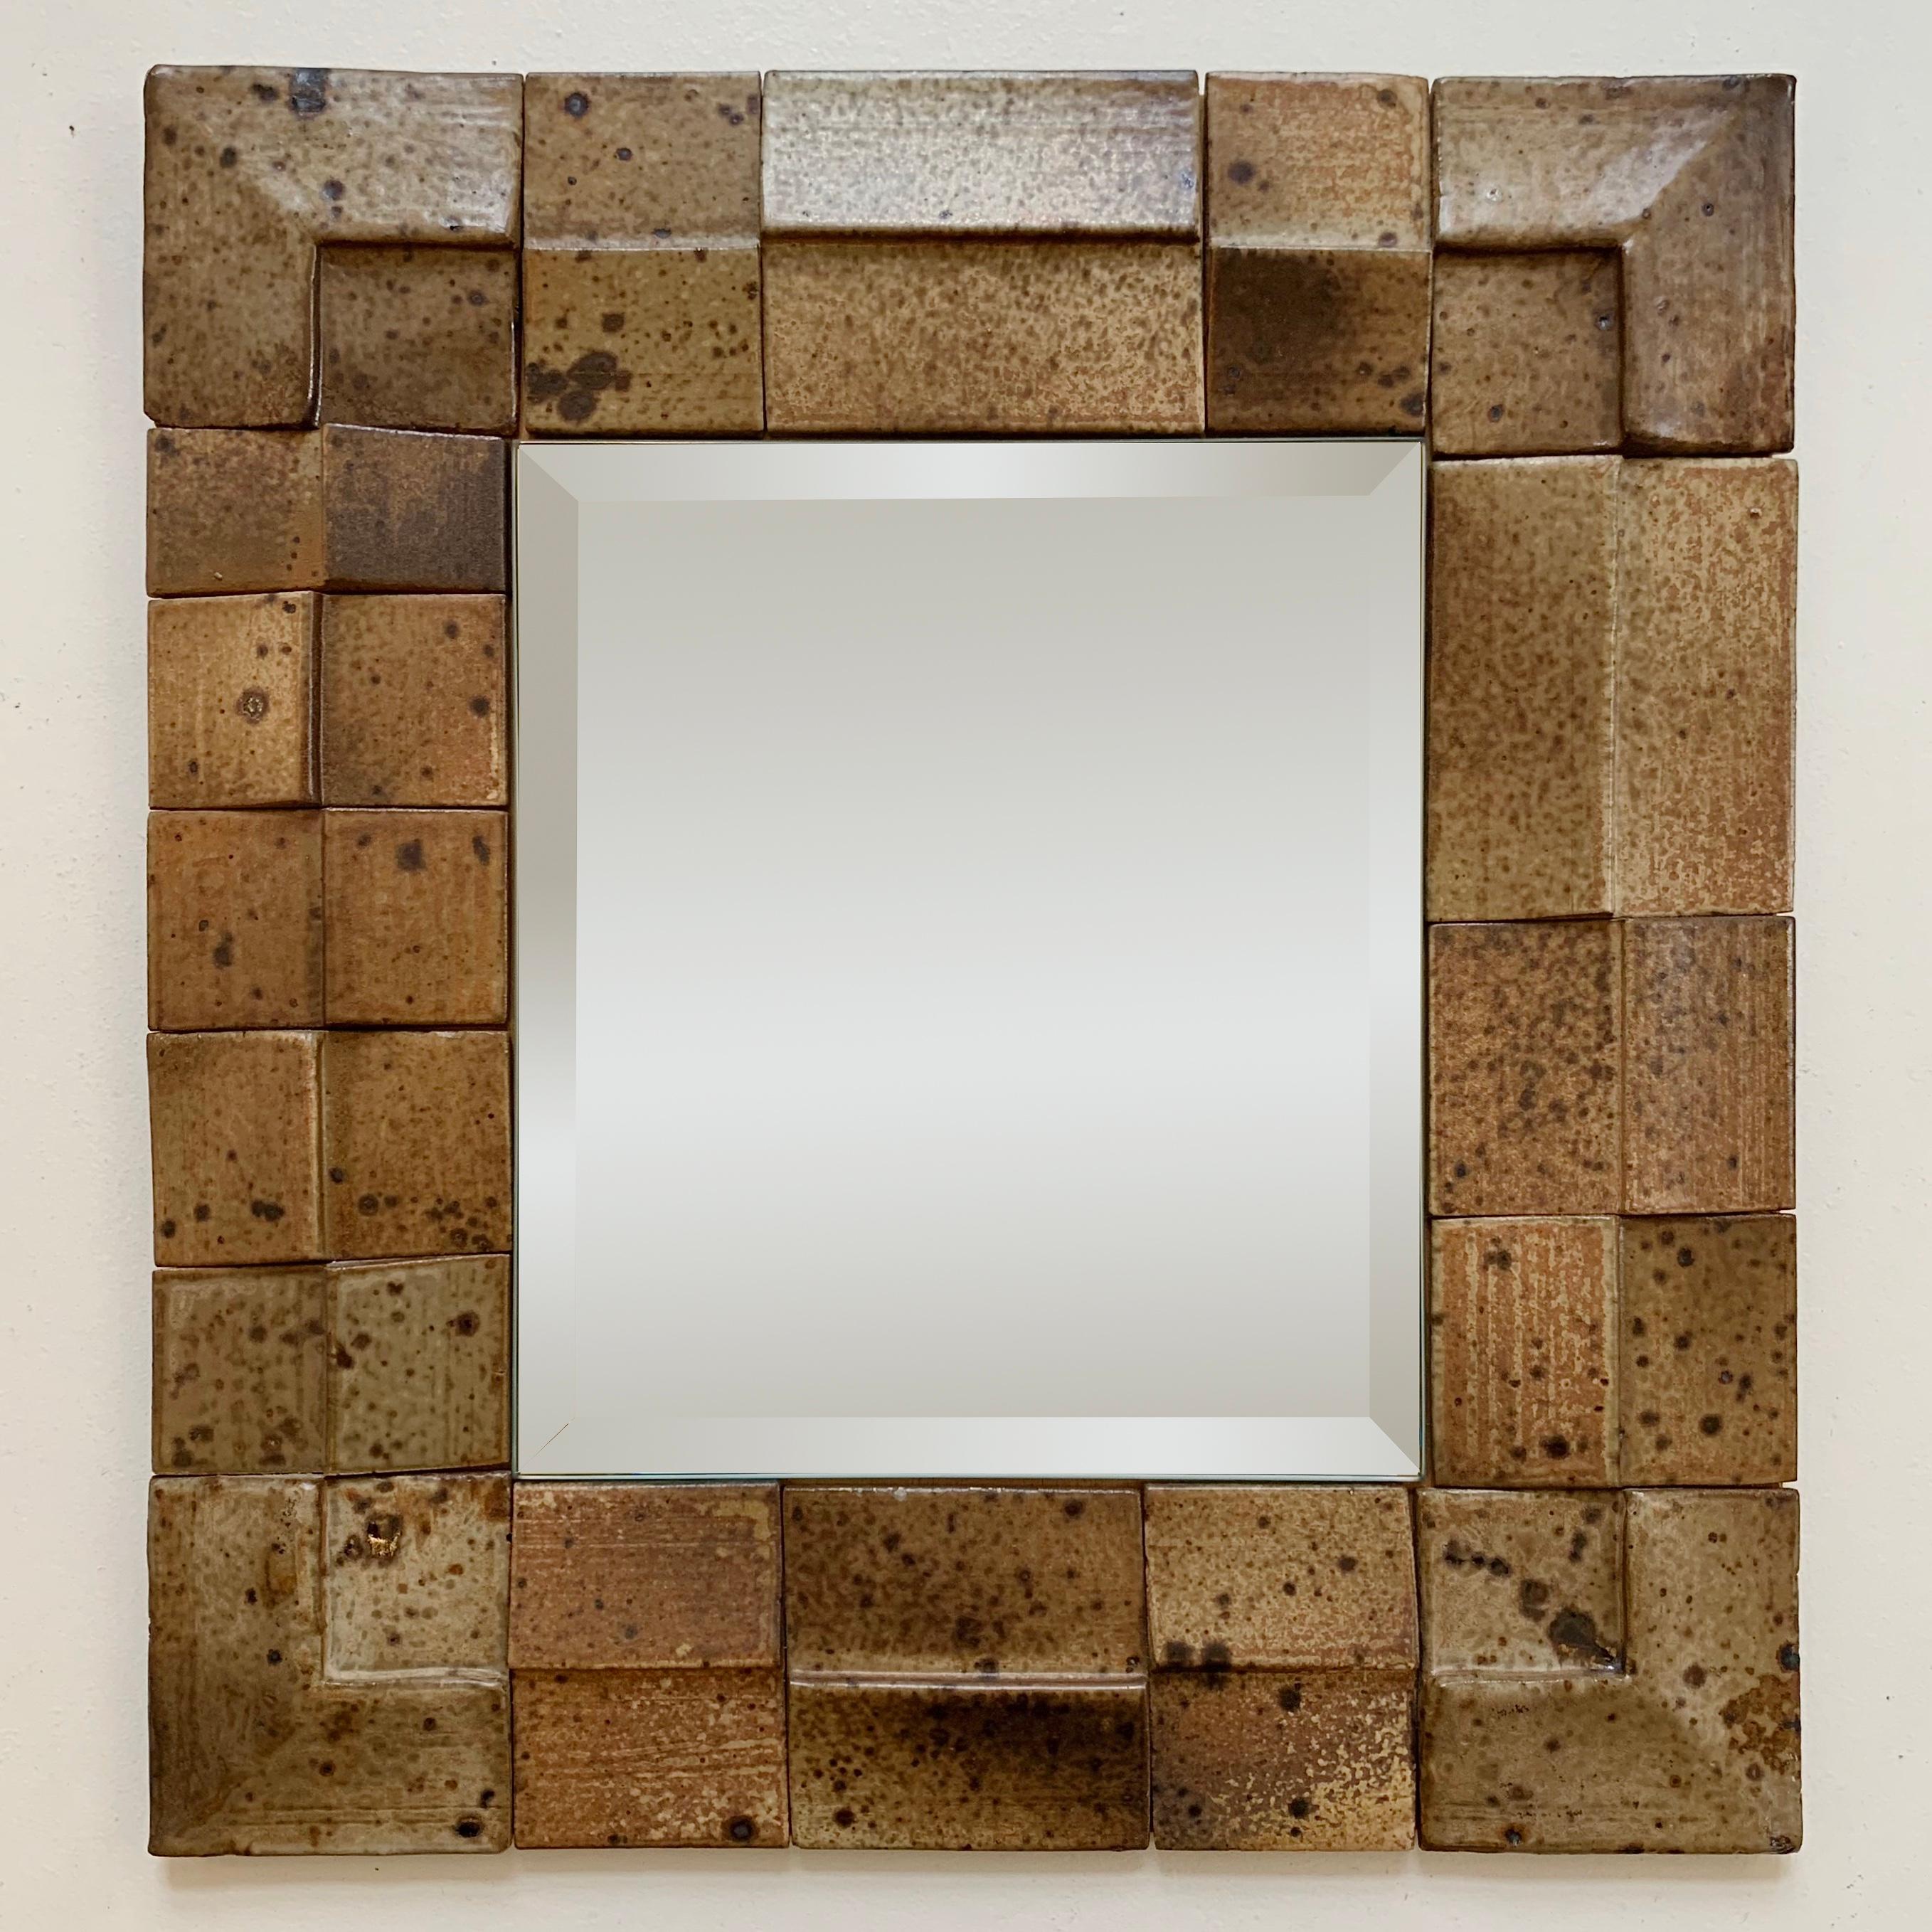 Nice Midcentury decorative ceramic wall mirror.
Brown sandsone elements on wood.
Beveled mirror.
France circa 1970
Dimensions: 35 cm H, 33 cm W, 2 cm D.
All purchases are covered by our Buyer Protection Guarantee.
This item can be returned